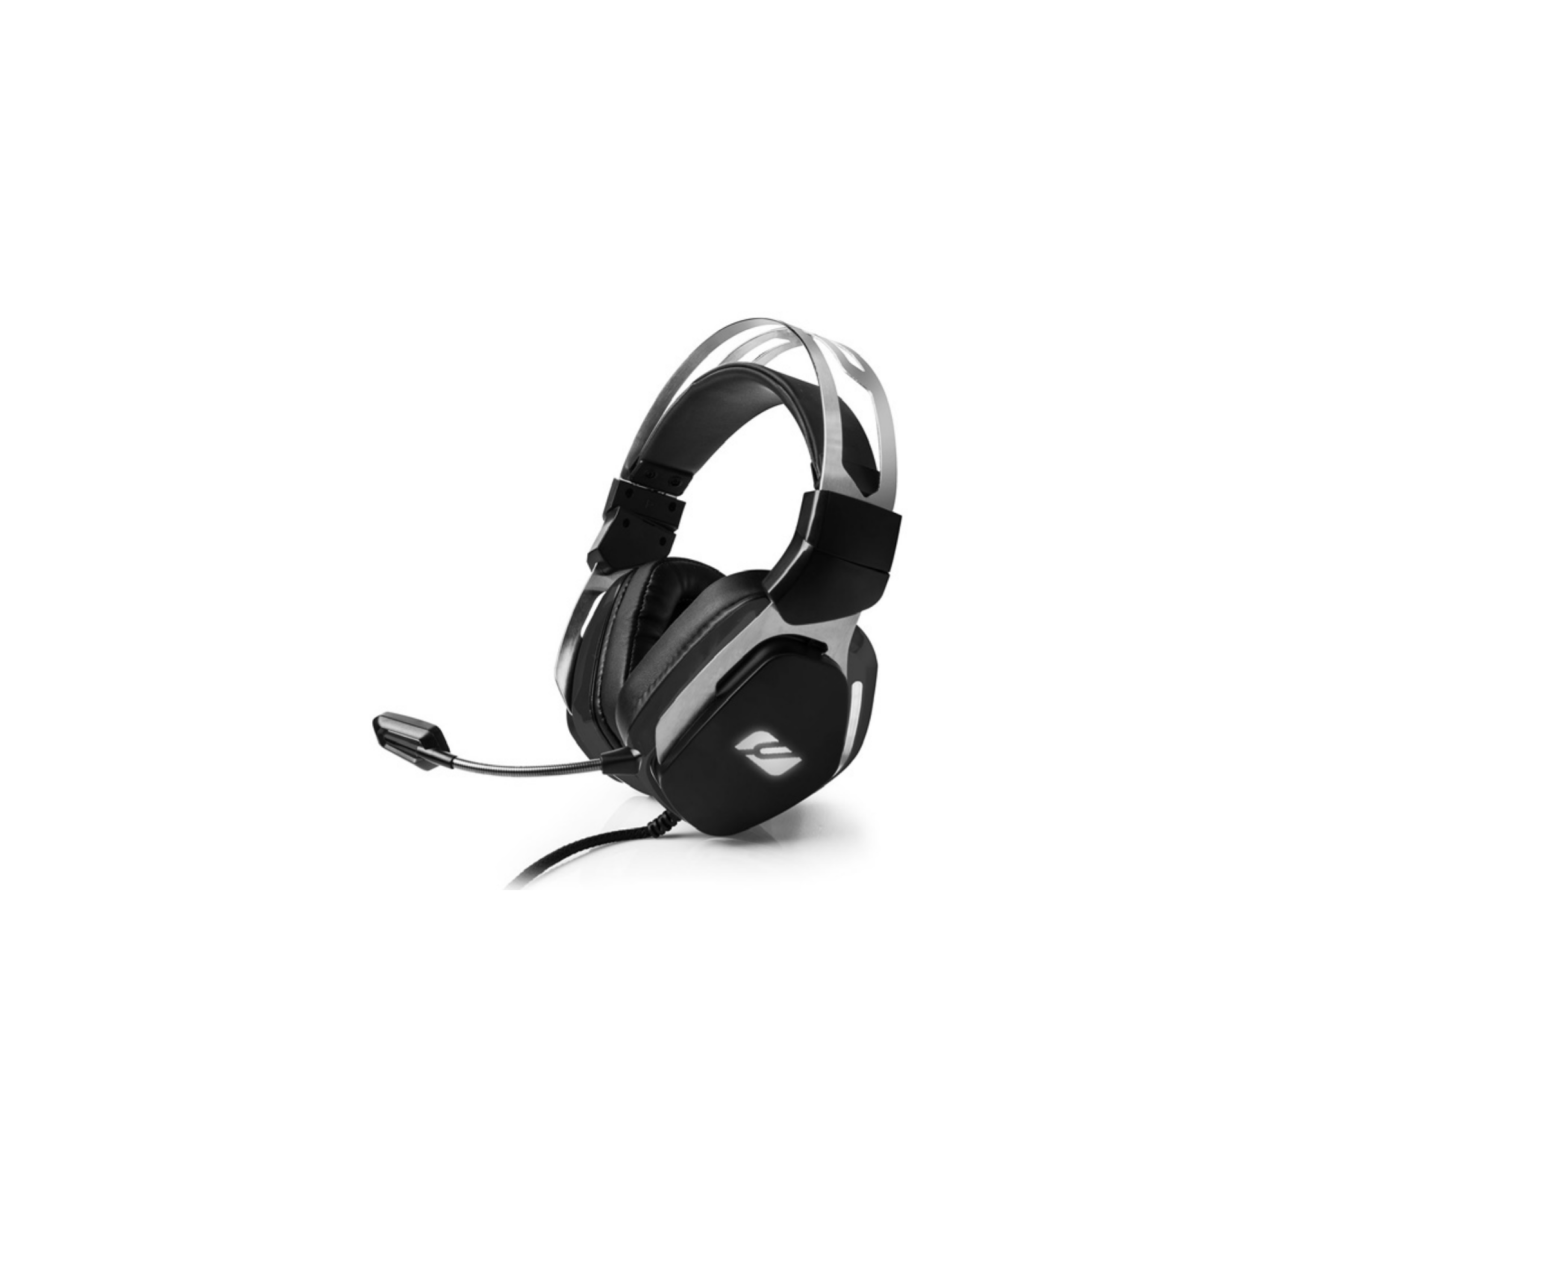 muse M-230 GH Closed-Back Gaming Headset with RGB Lighting User Manual